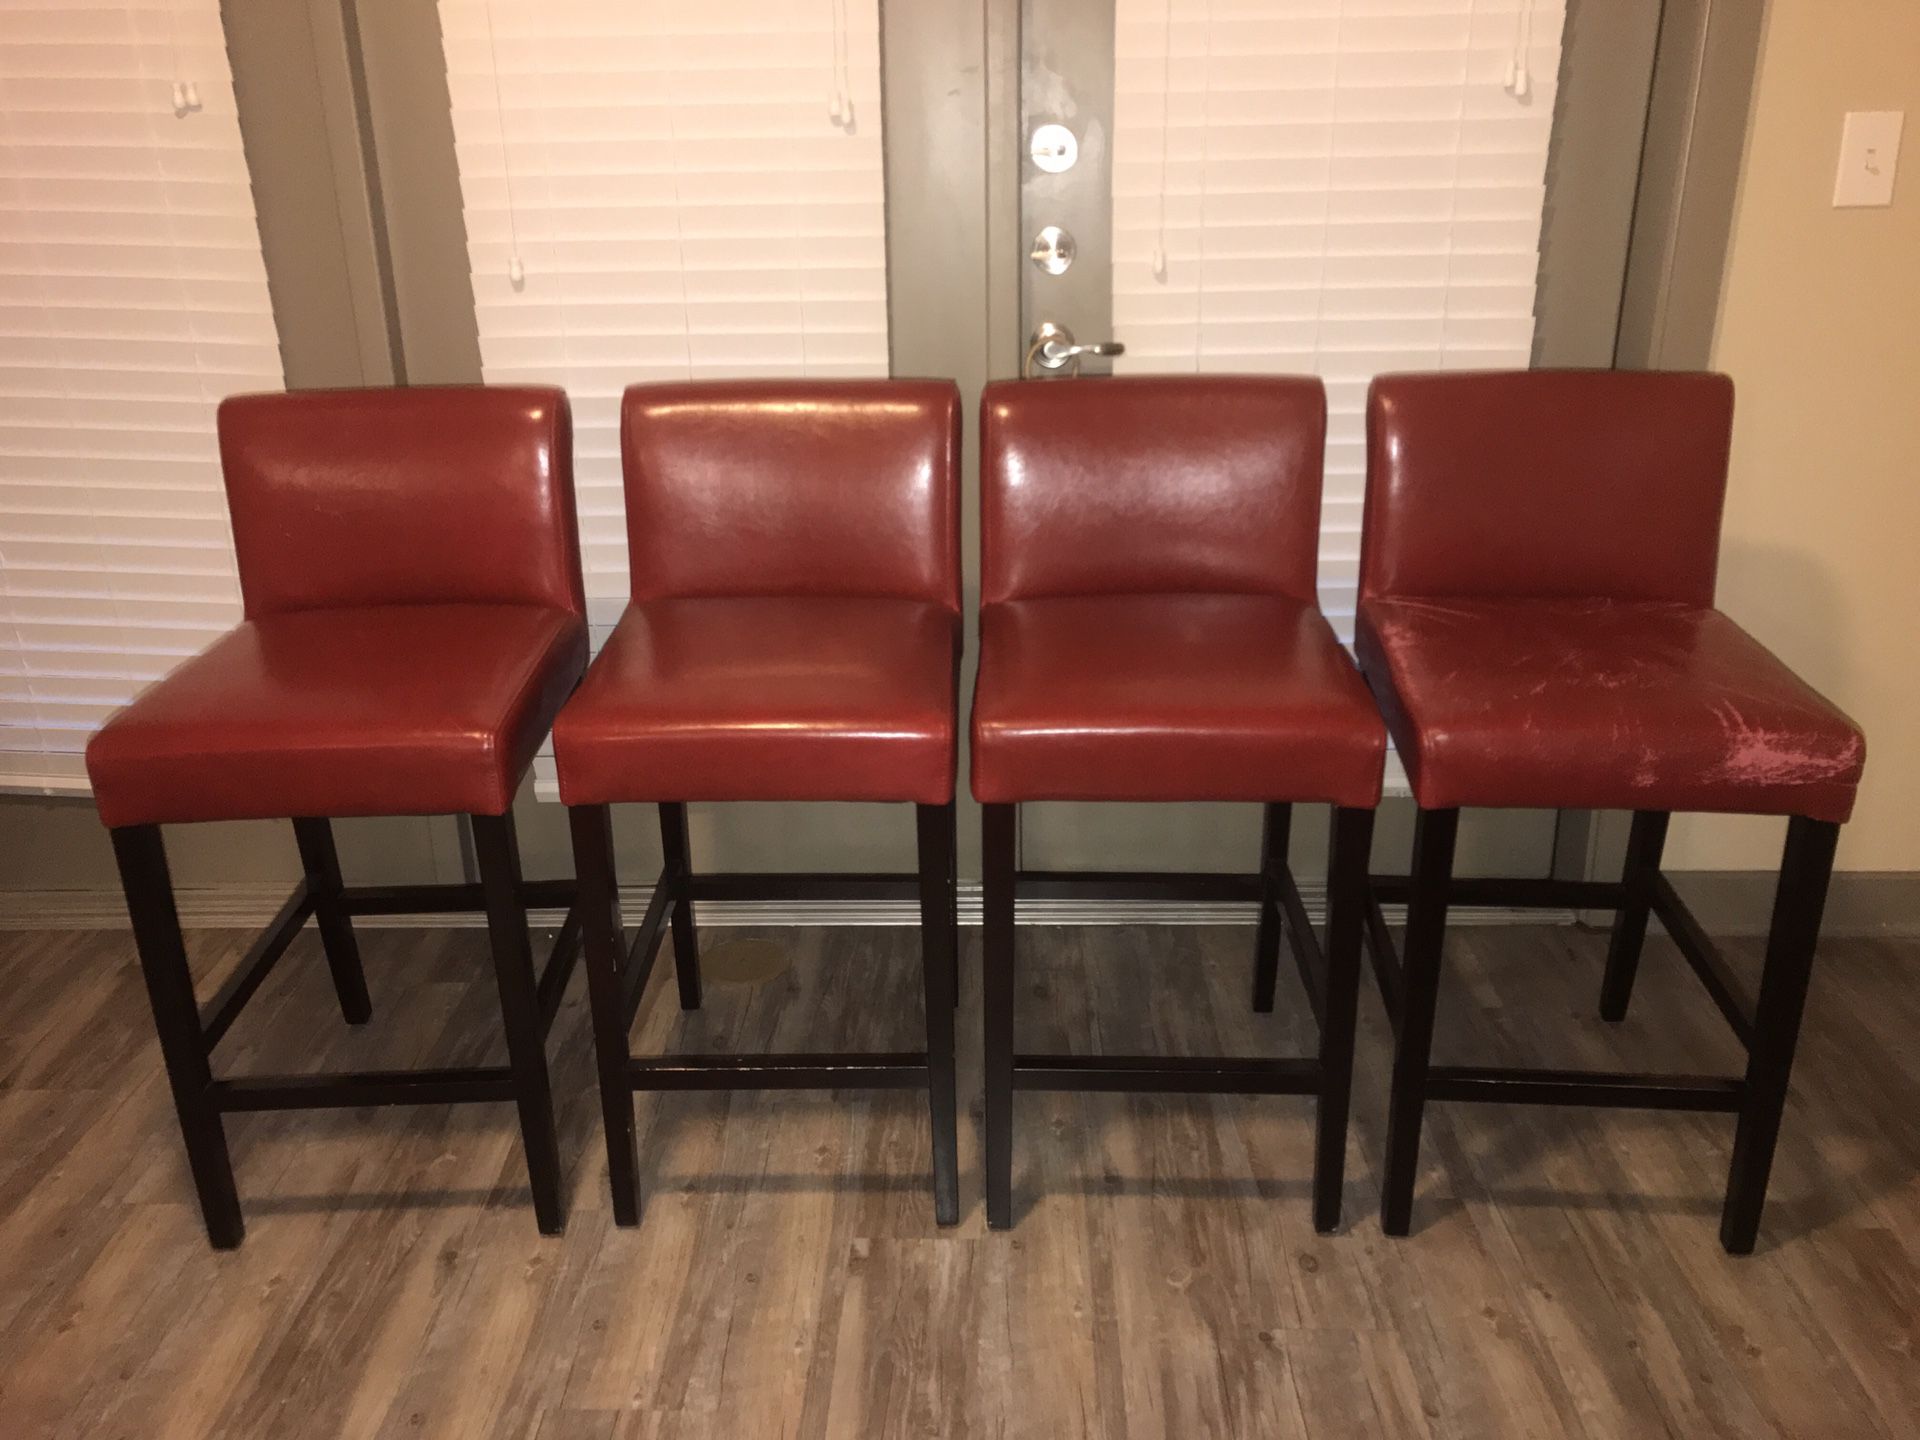 Red leather counter stools (set of 4)